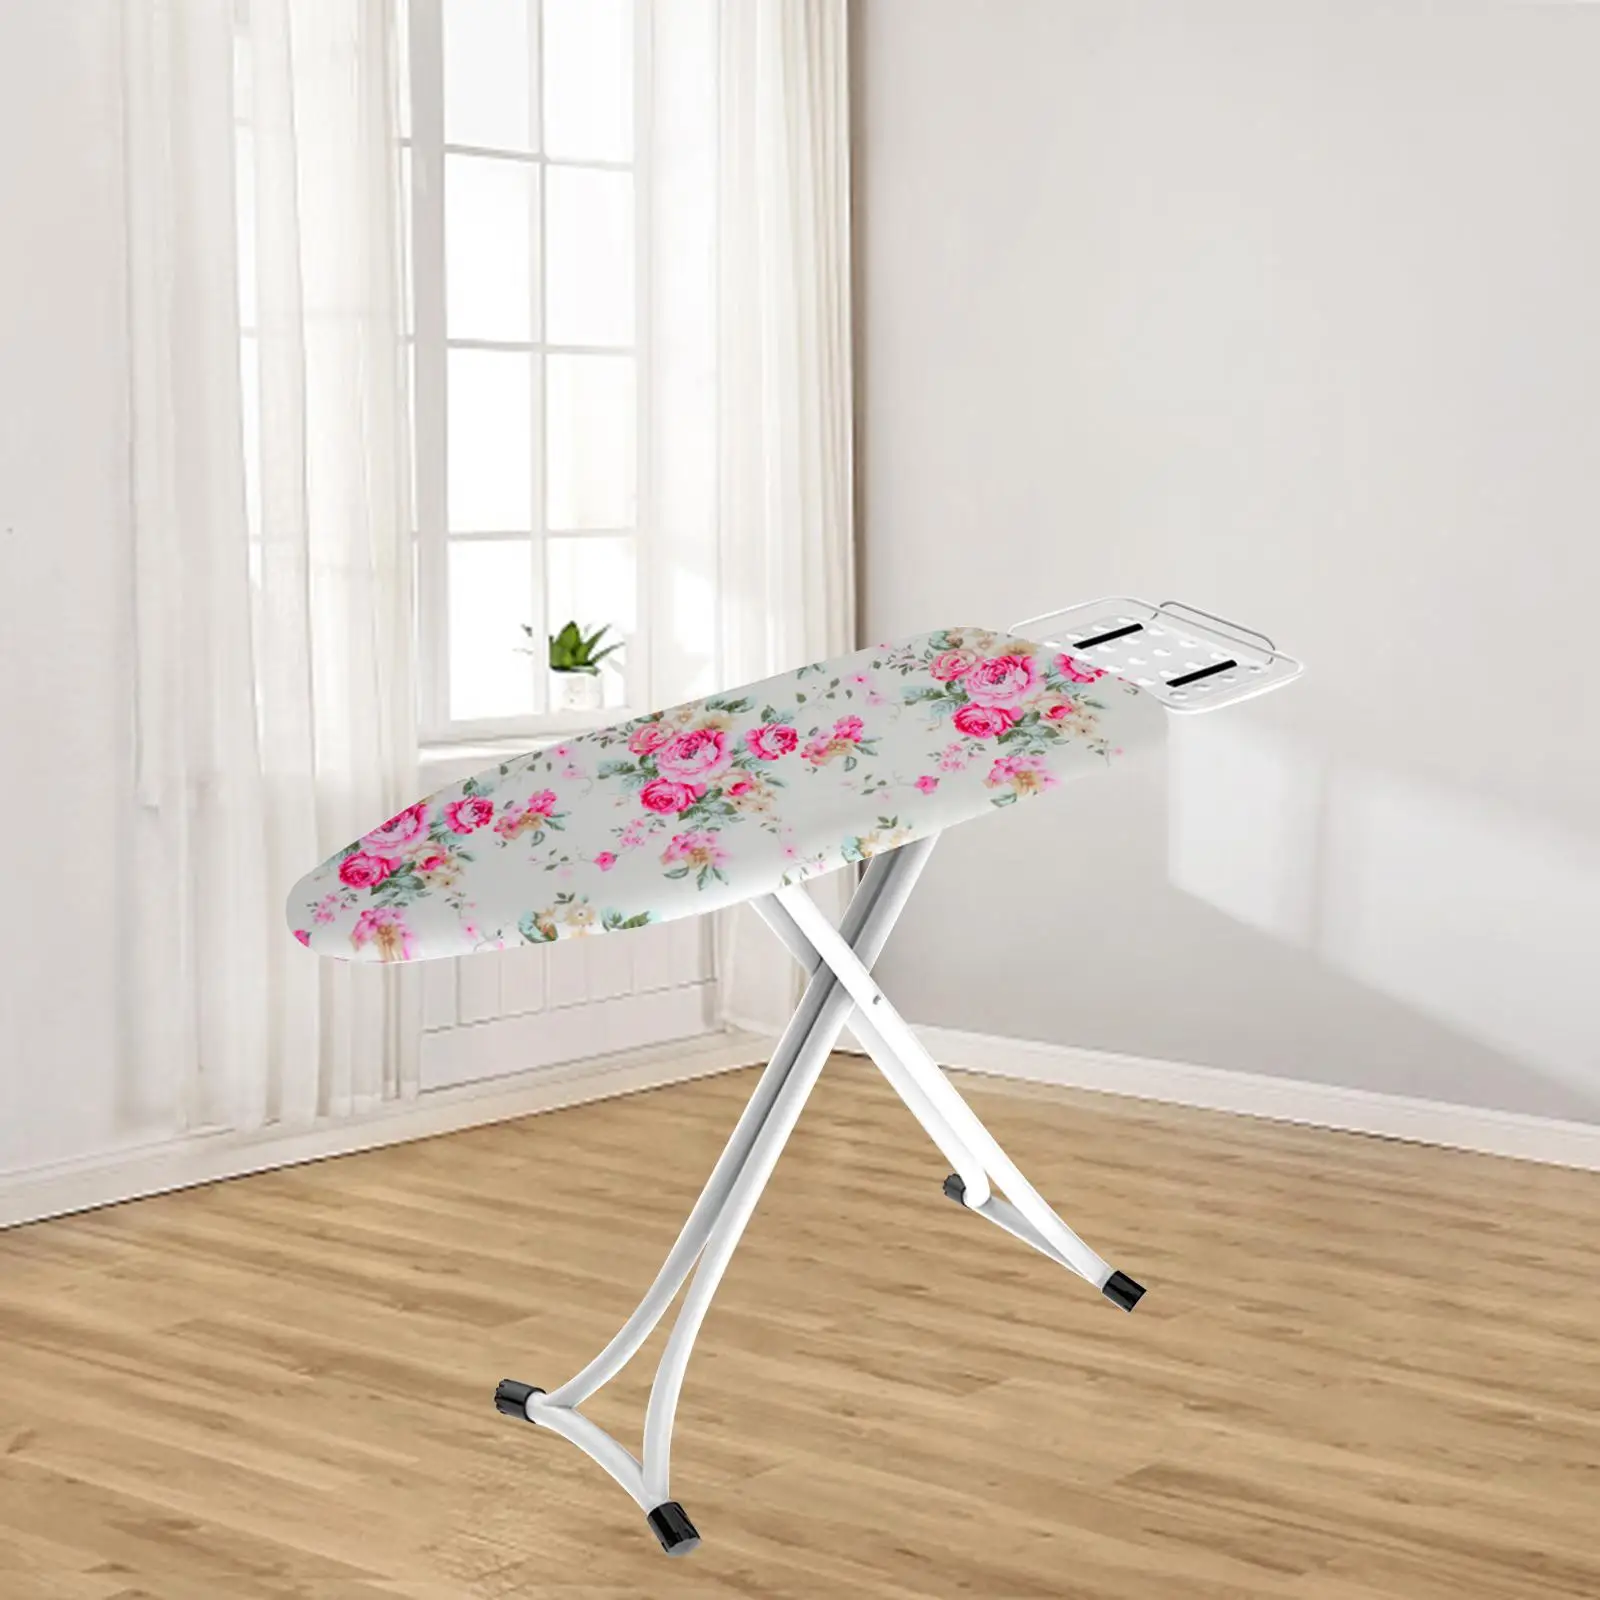 Cotton Ironing Board Padded Cover Blanket Pad 120Cmx41cm cleaning Tools